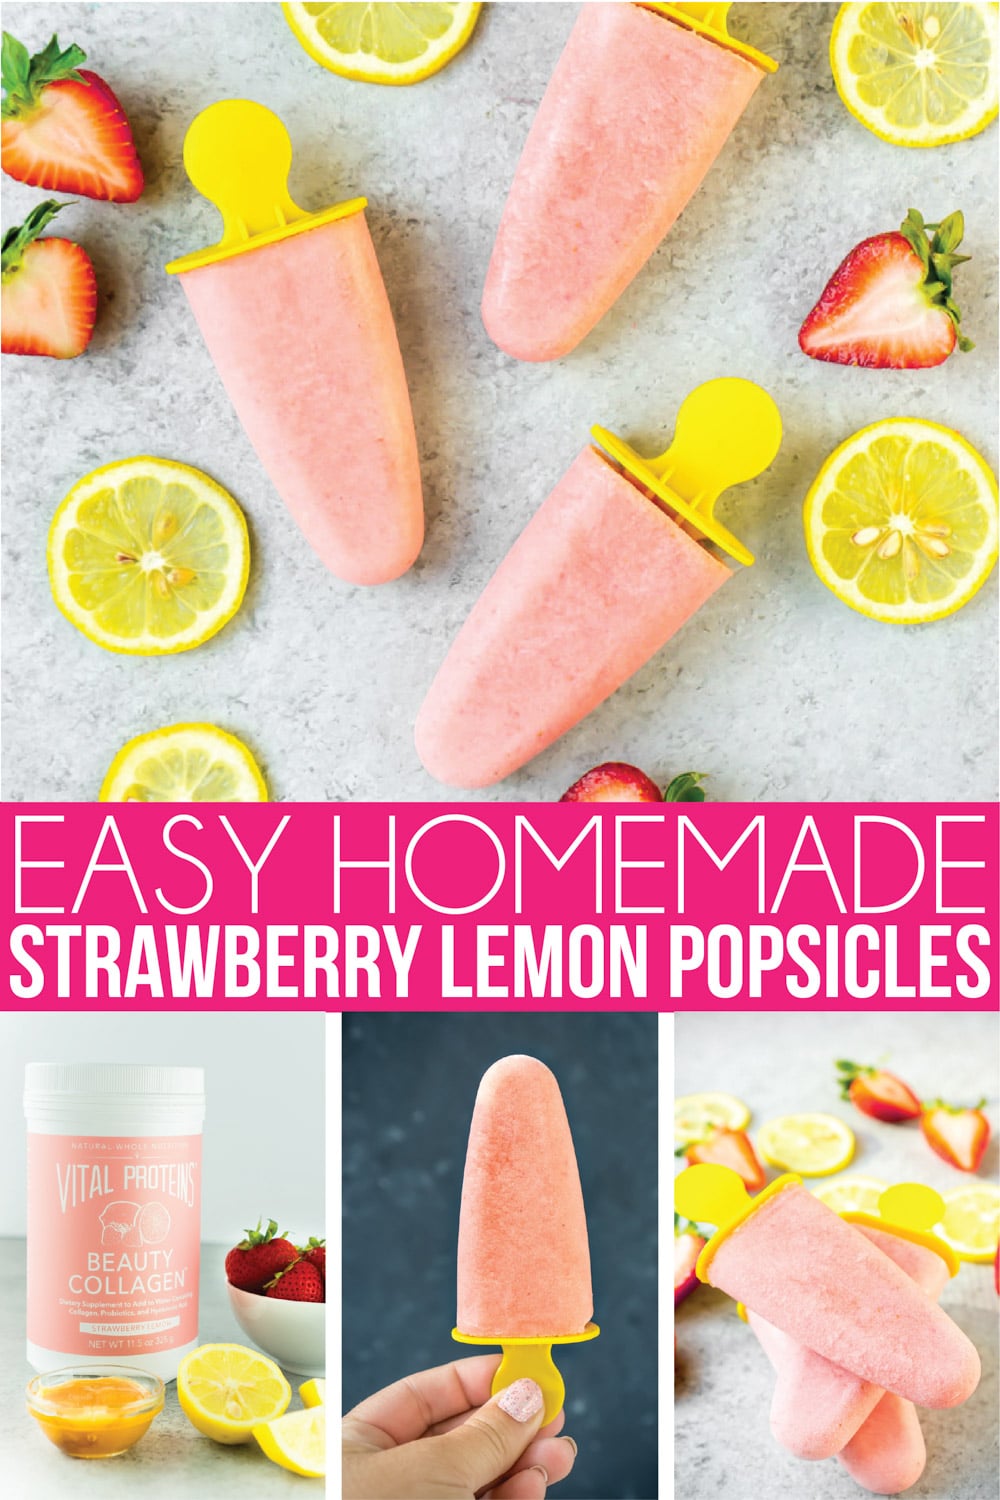 Delicious and easy homemade strawberry lemonade popsicles!